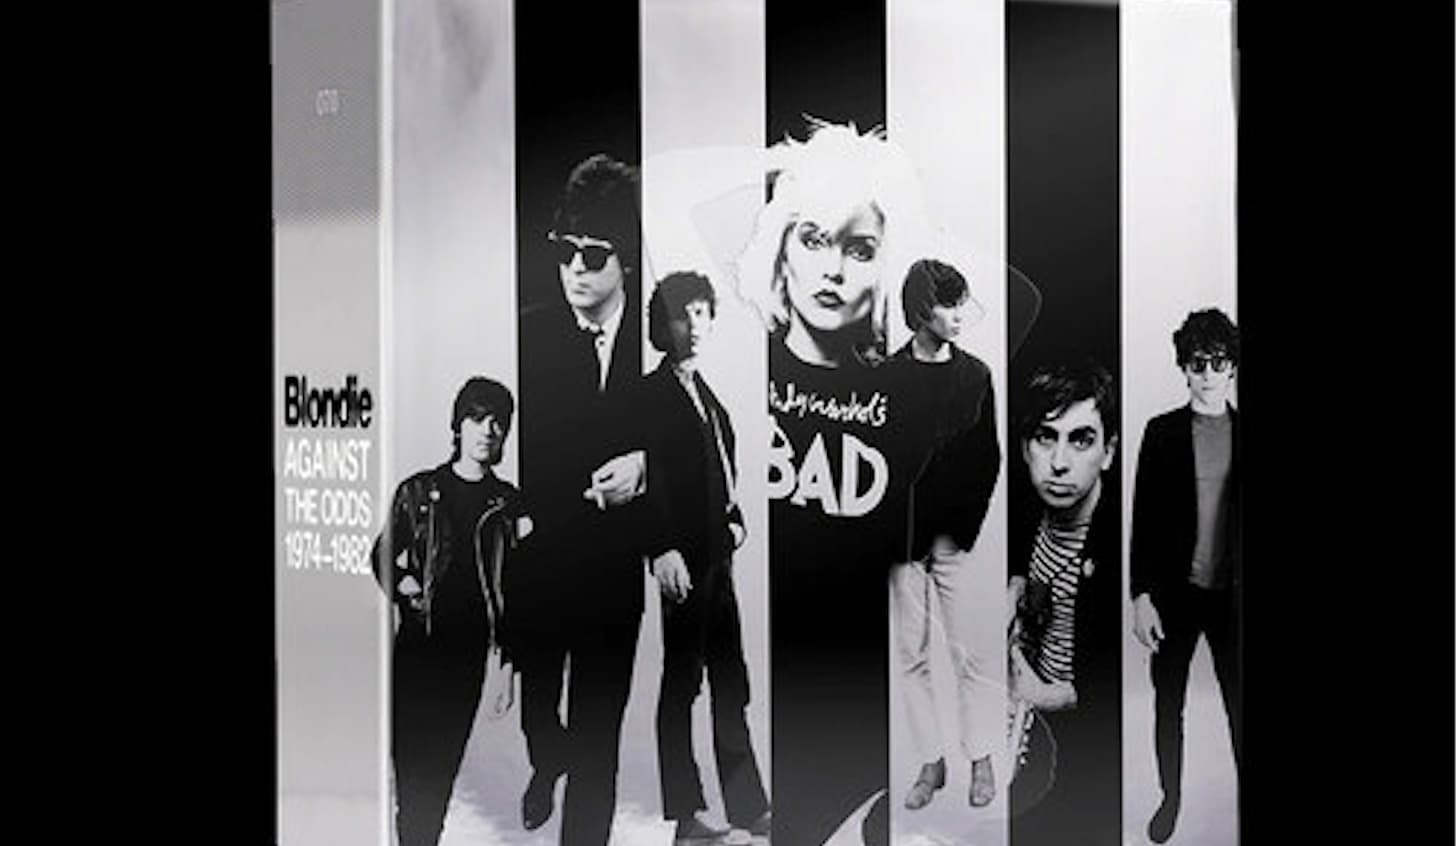 blondie_boxset_against the odds